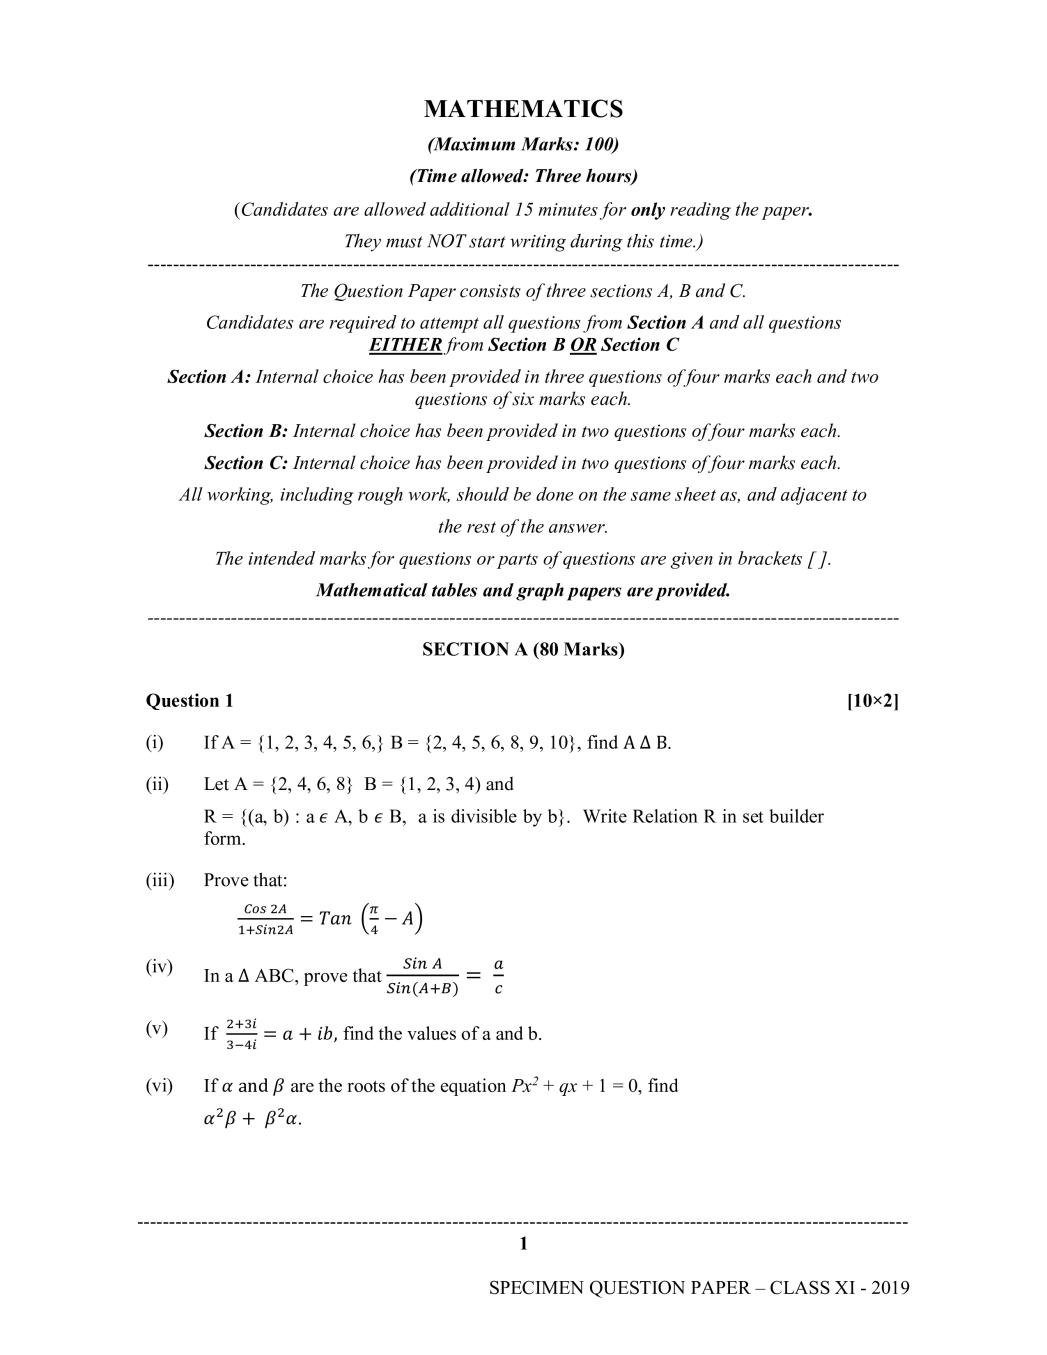 ISC Class 11 Specimen Paper 2019 for Mathematics - Page 1